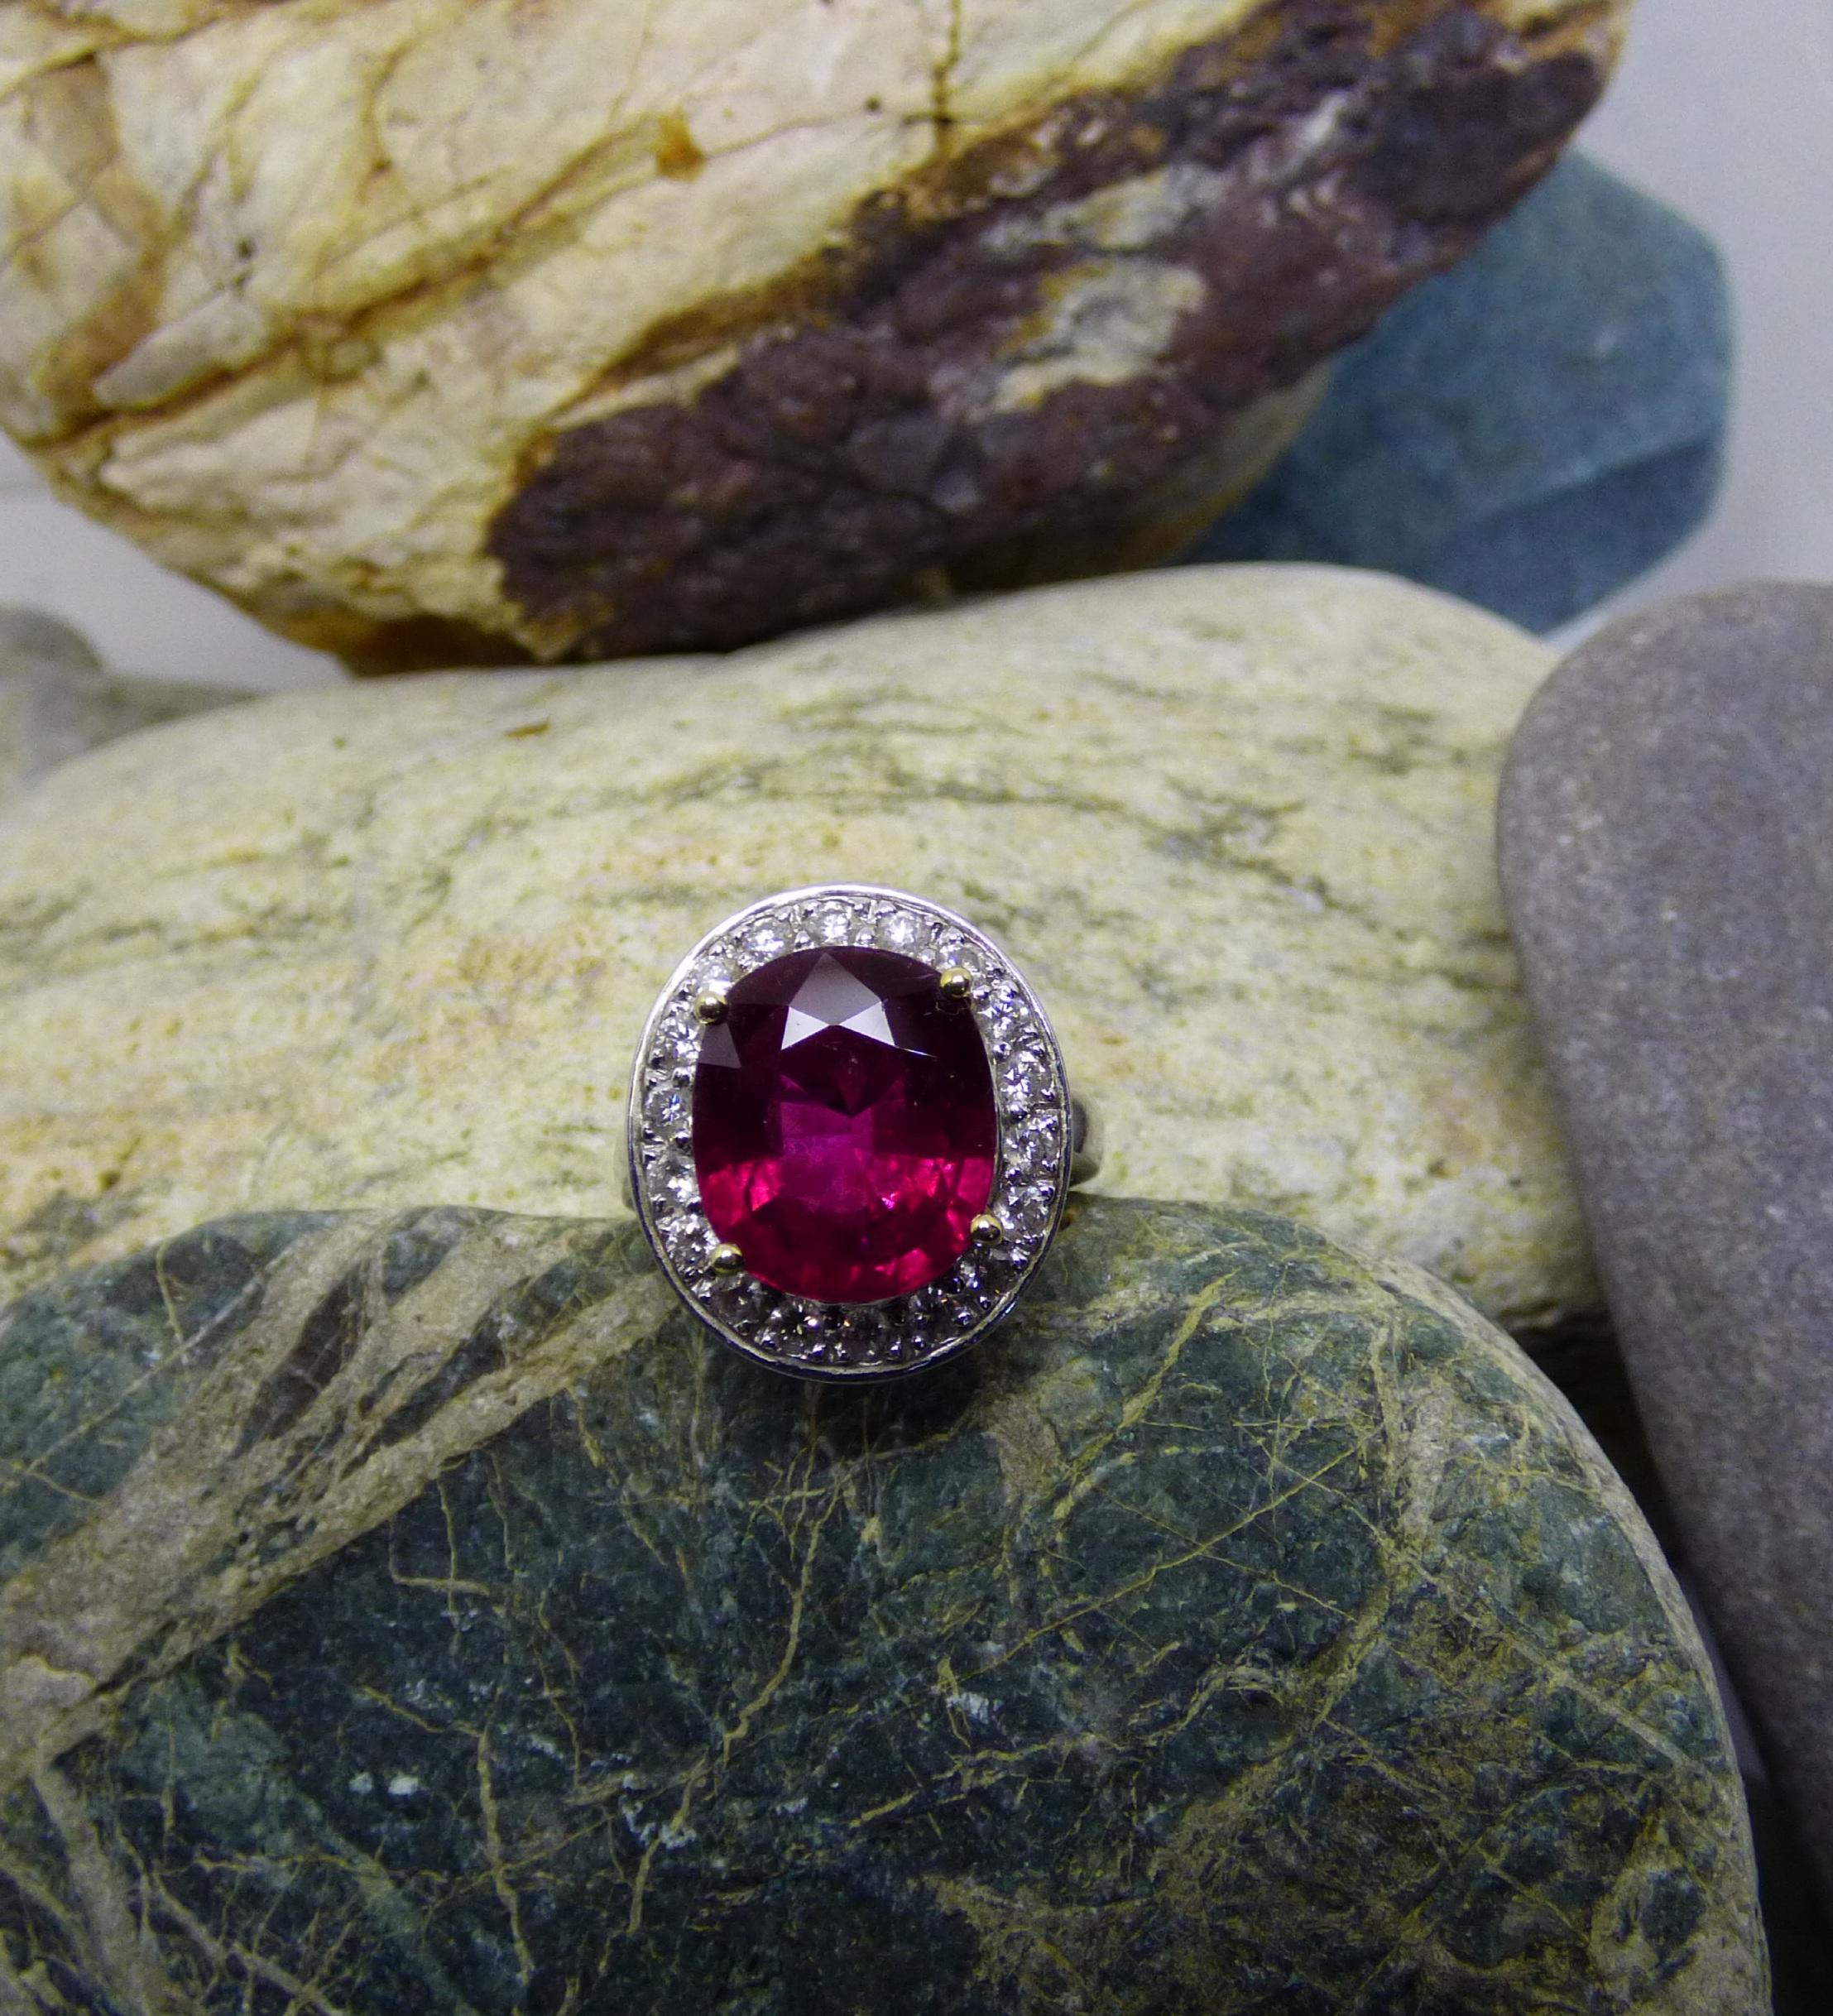 A bright and colourful Rubellite Tourmaline attracts the eye to this ring.  The Rubellite is 15X12mm and weighs 6.22ct. It is surrounded by 17 Diamonds with a total Diamond weight of 1.71ct. The total face of the ring is 22X19mm.
The ring is